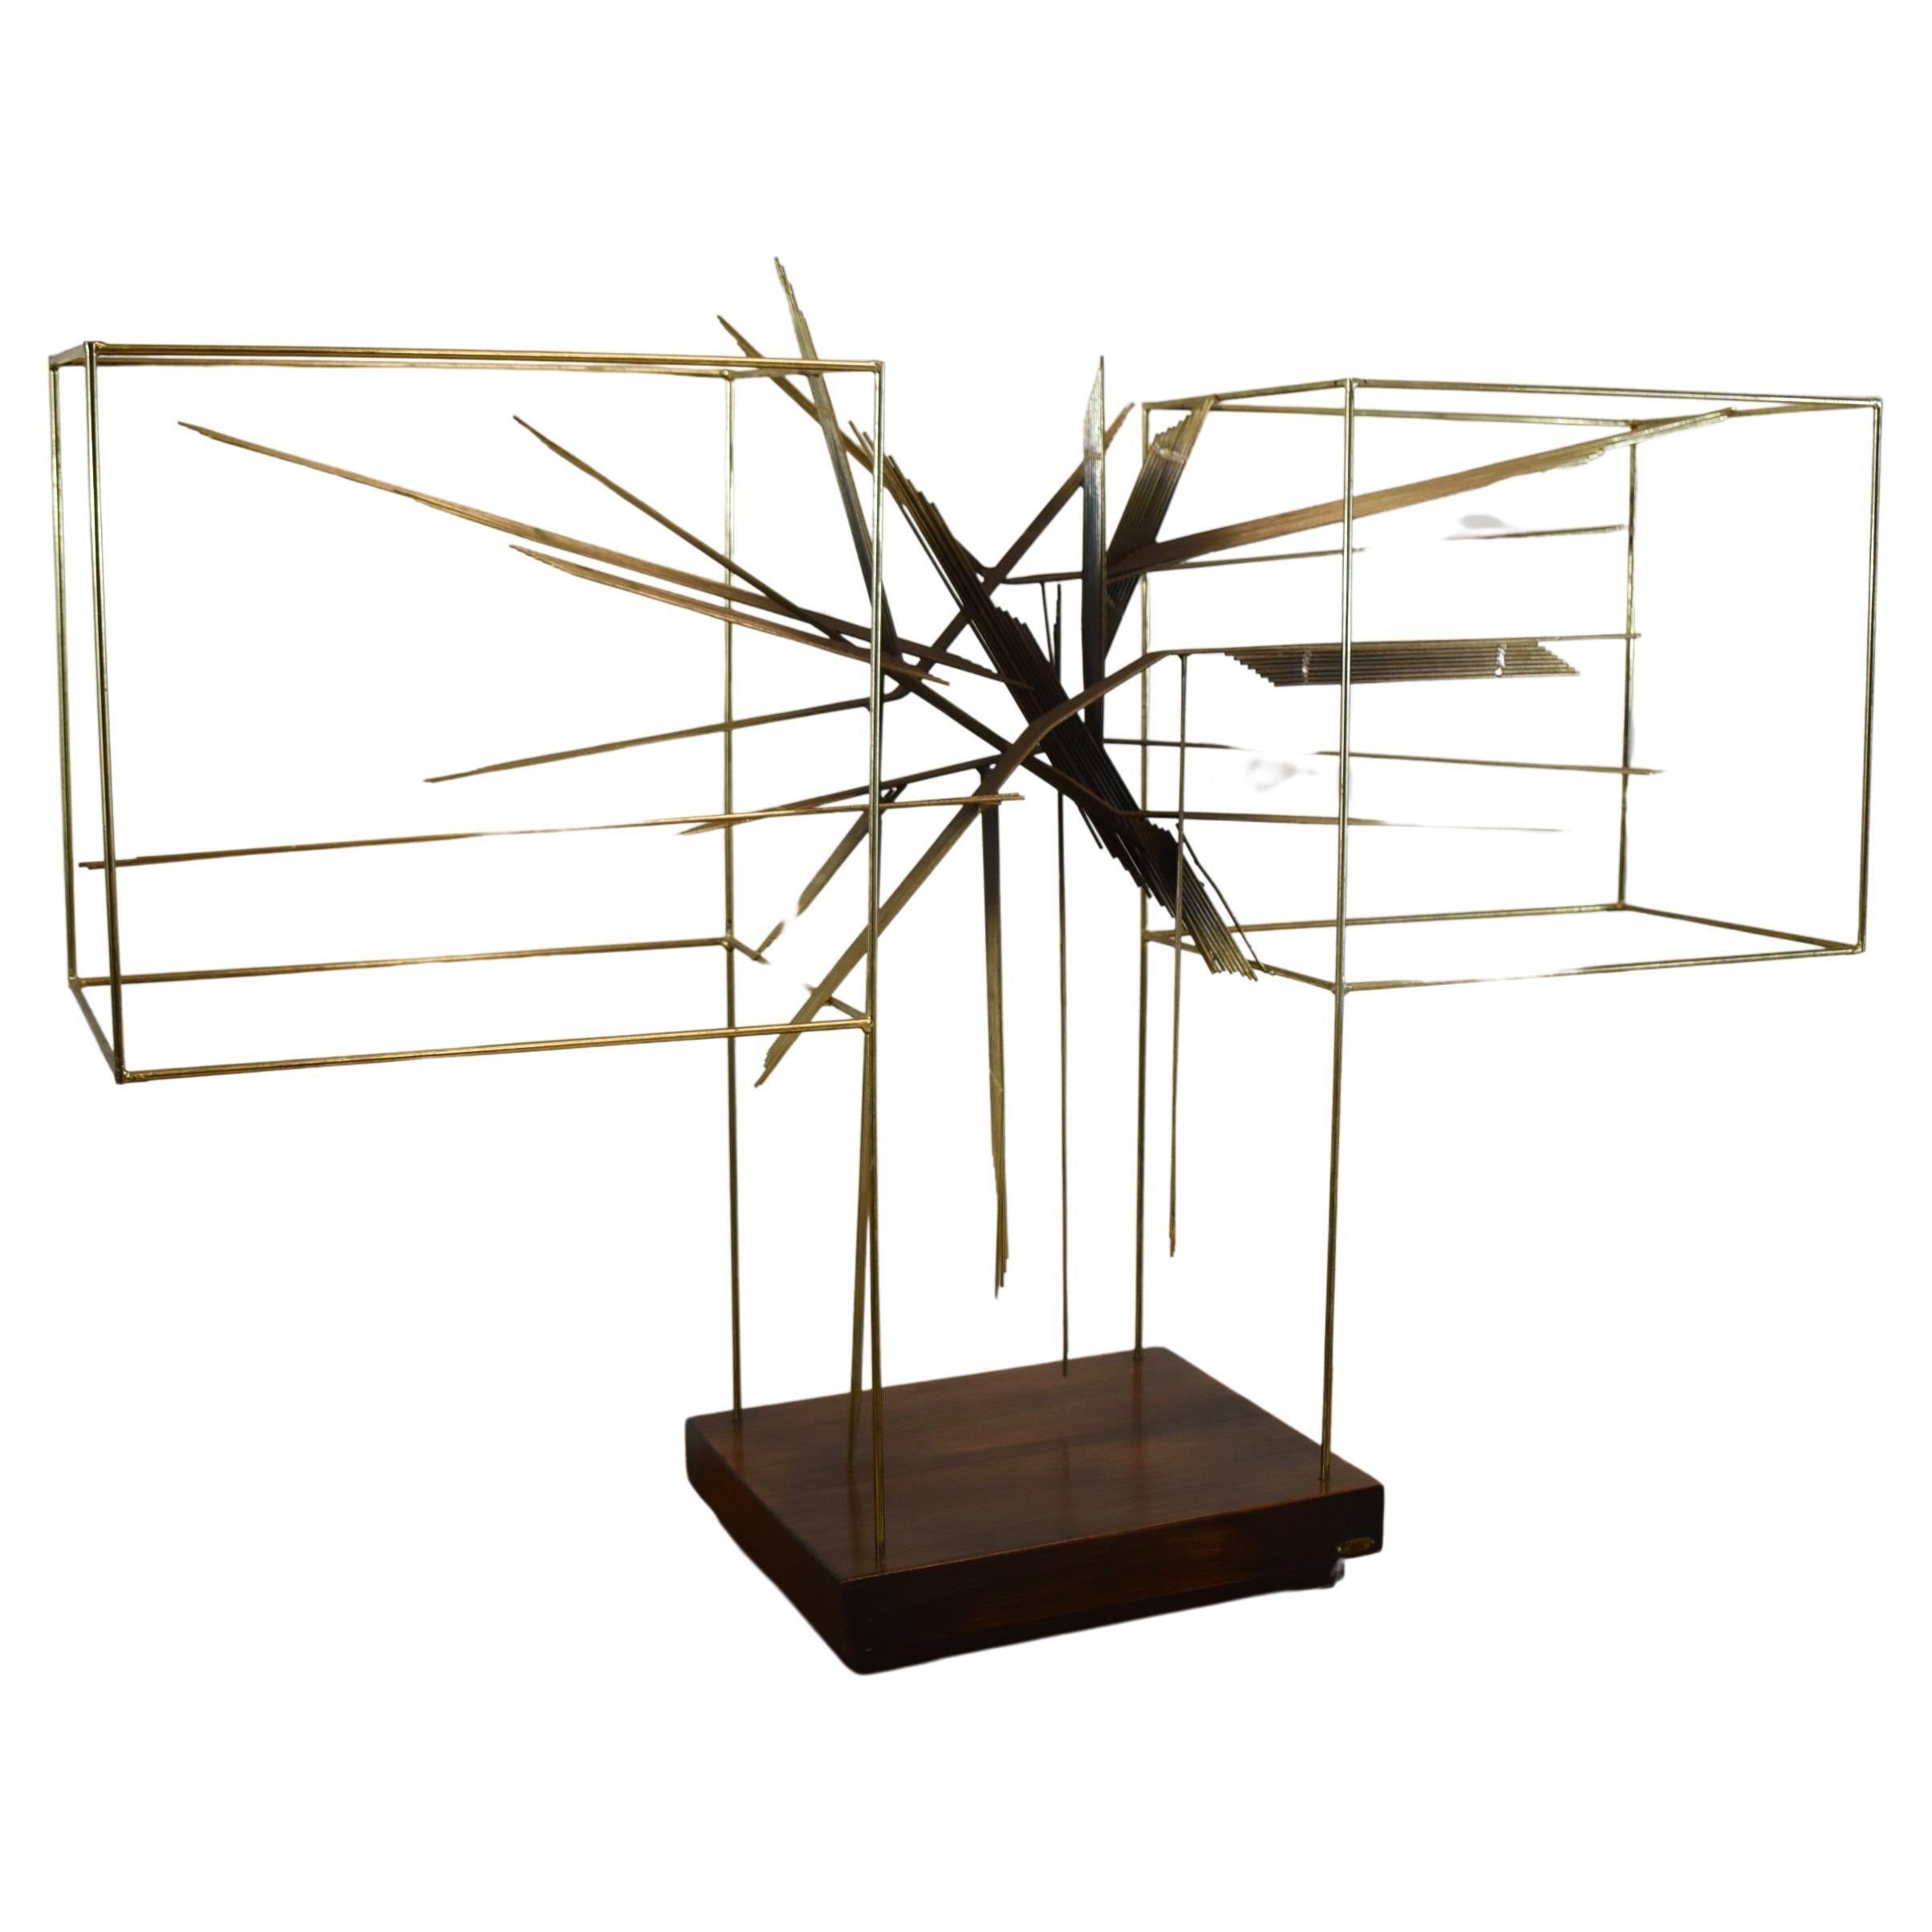 Cubist Sculpture by Curtis Jere, Intersecting Metal Rods For Sale